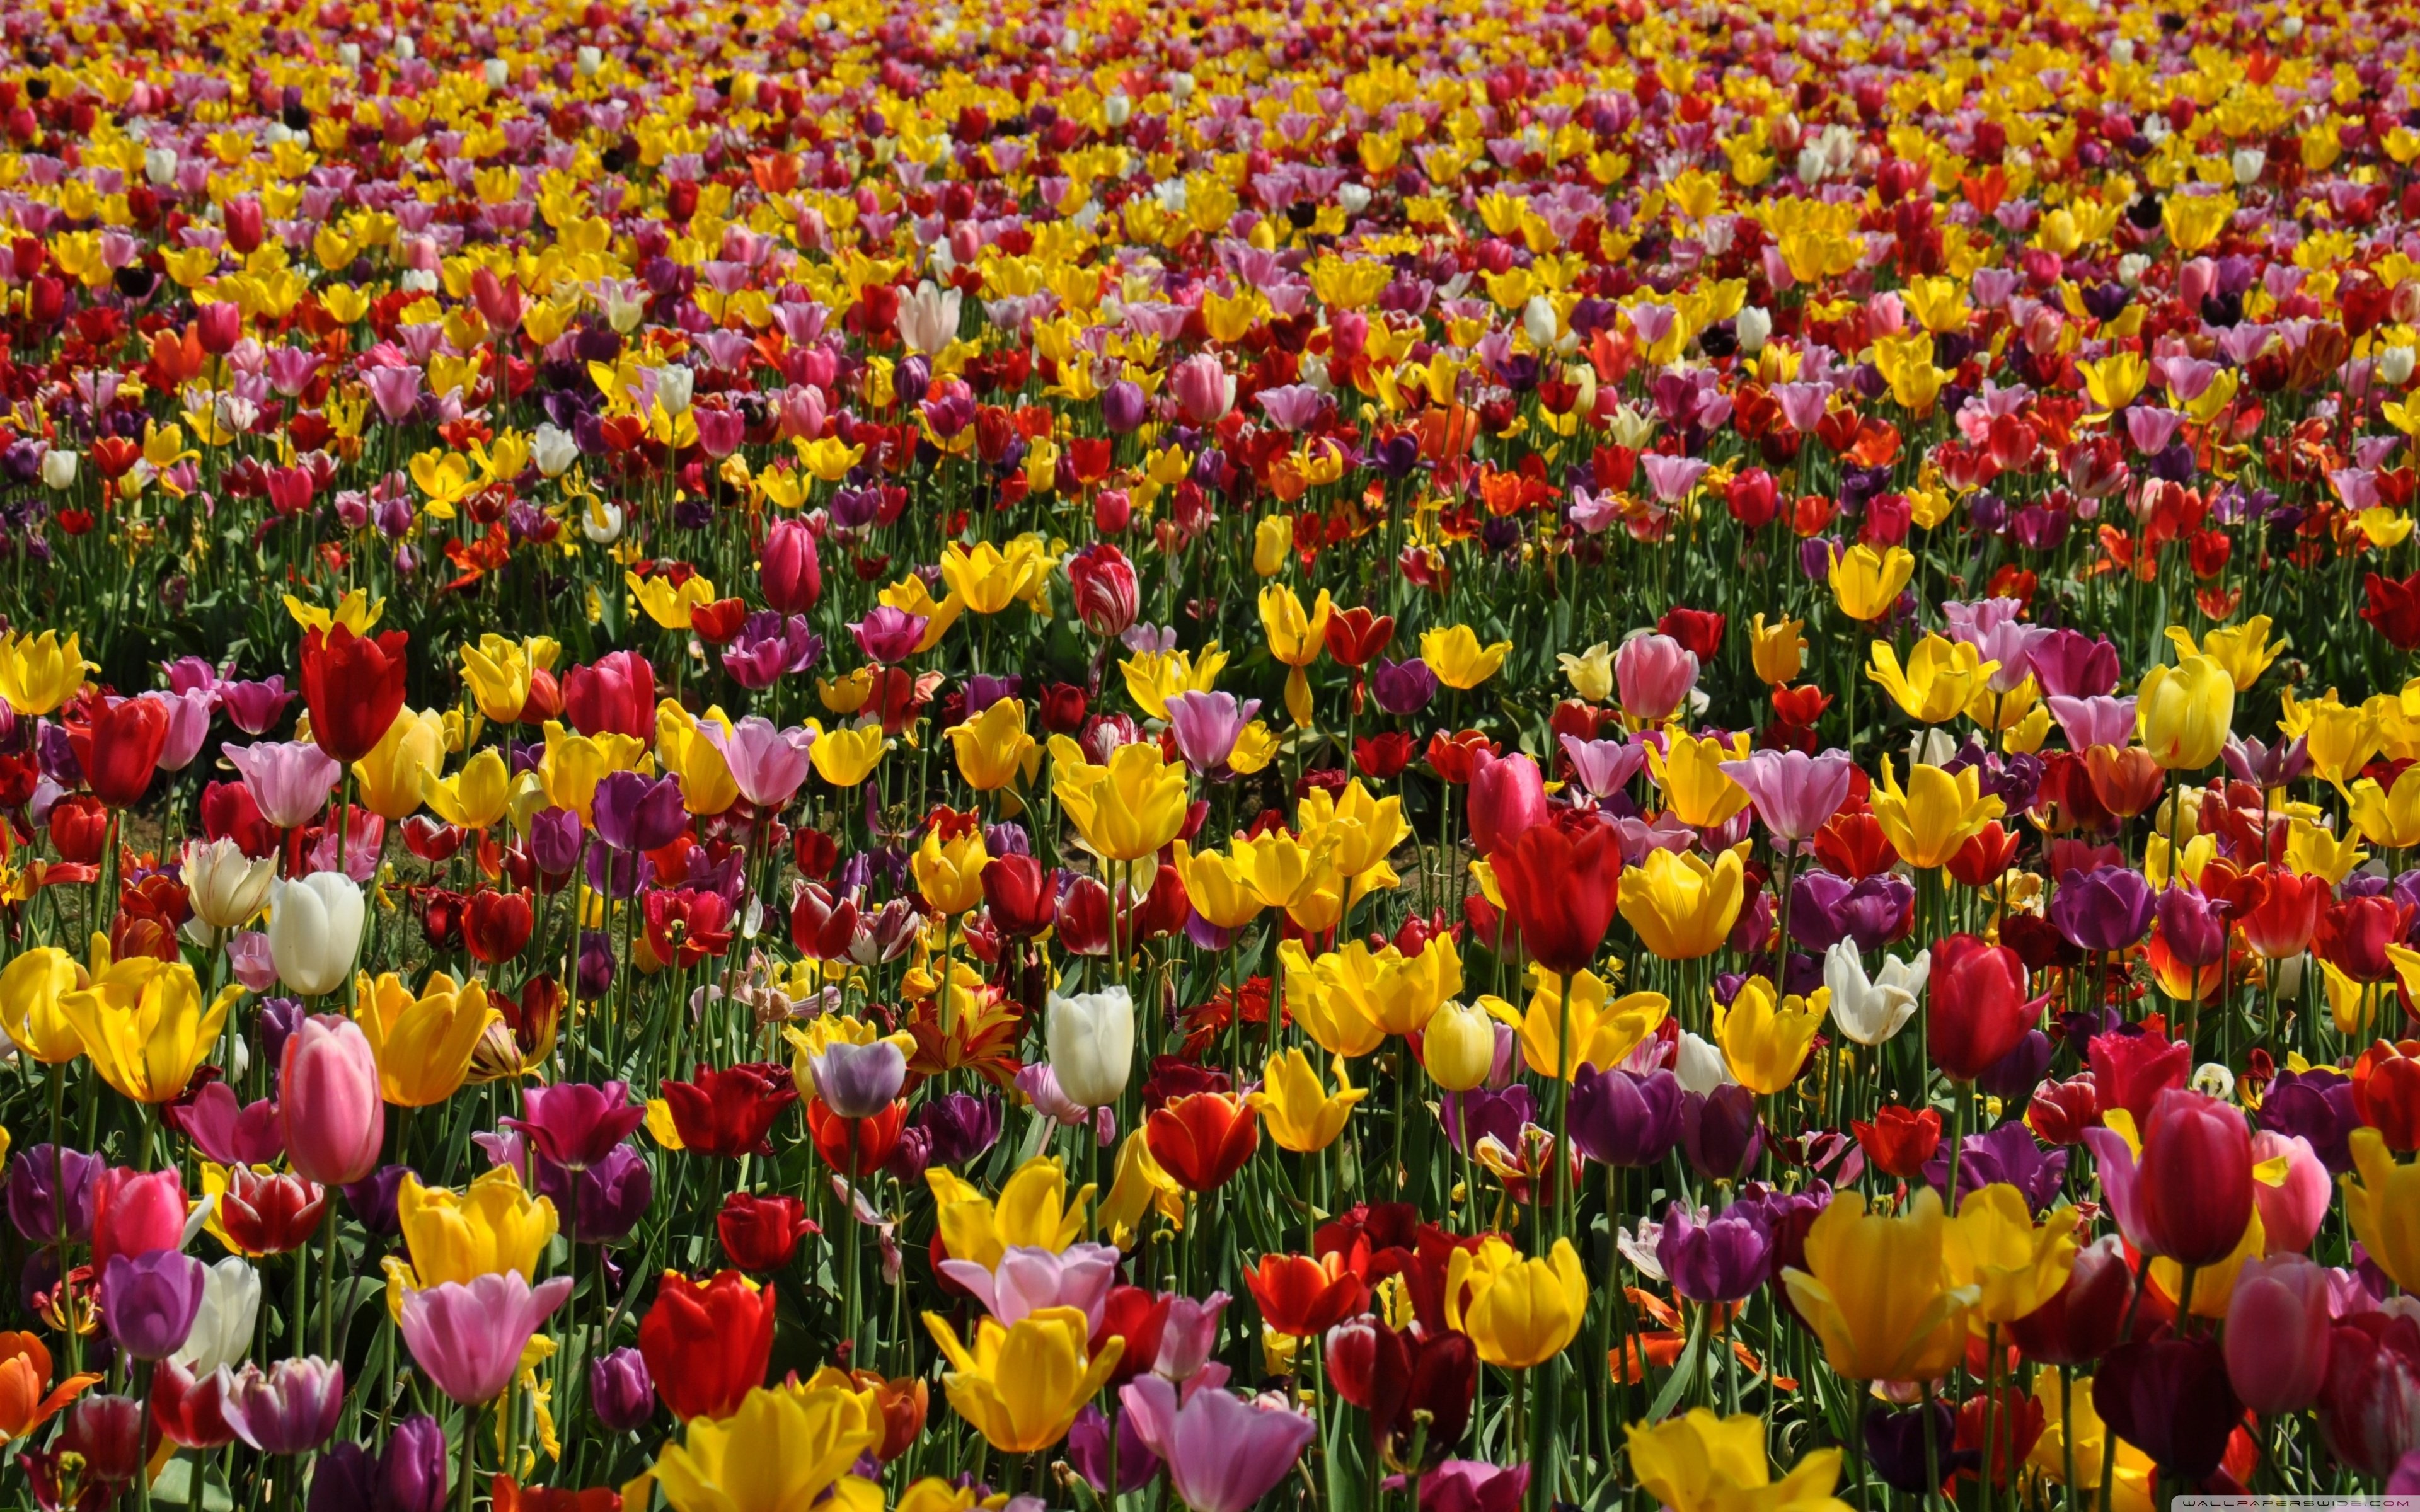 Spring Pink and Yellow Tulips Ultra HD Desktop Background Wallpaper for: Widescreen & UltraWide Desktop & Laptop, Multi Display, Dual Monitor, Tablet